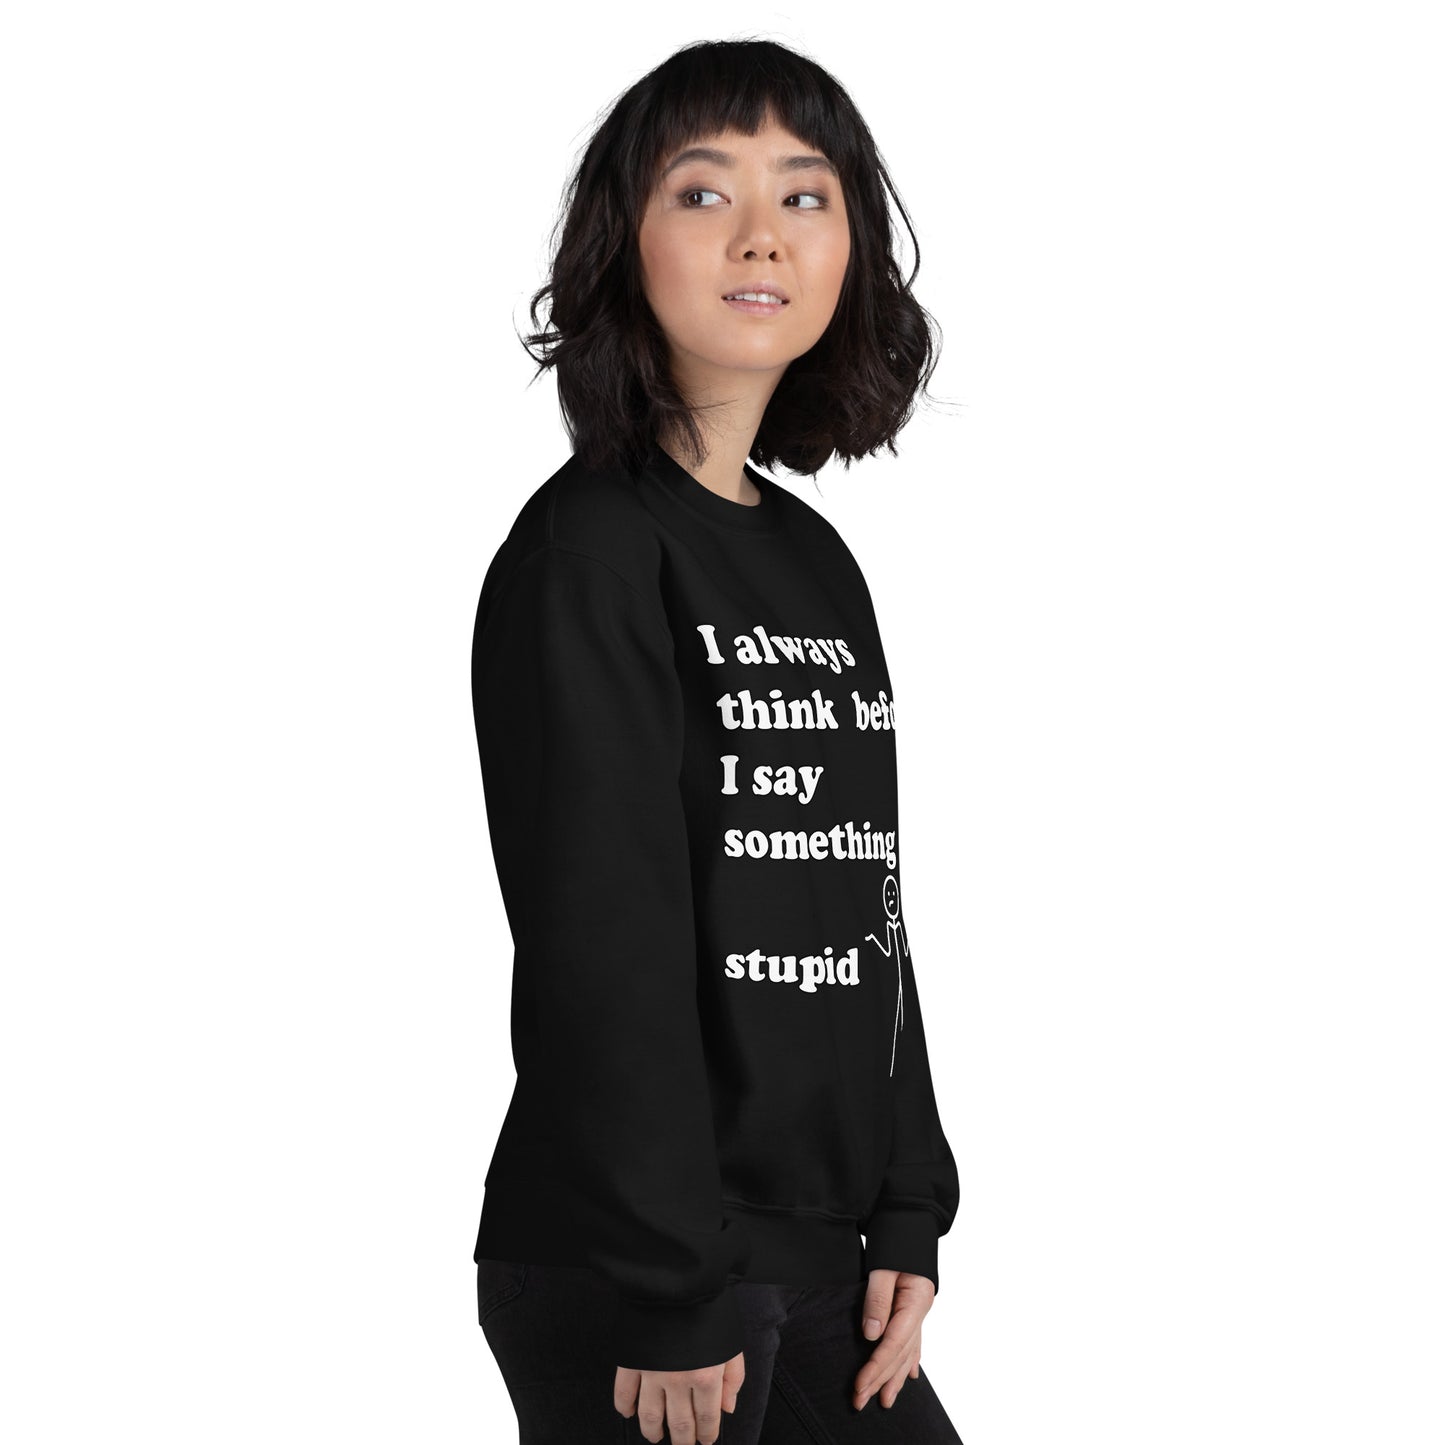 Woman with black sweatshirt with text "I always think before I say something stupid"